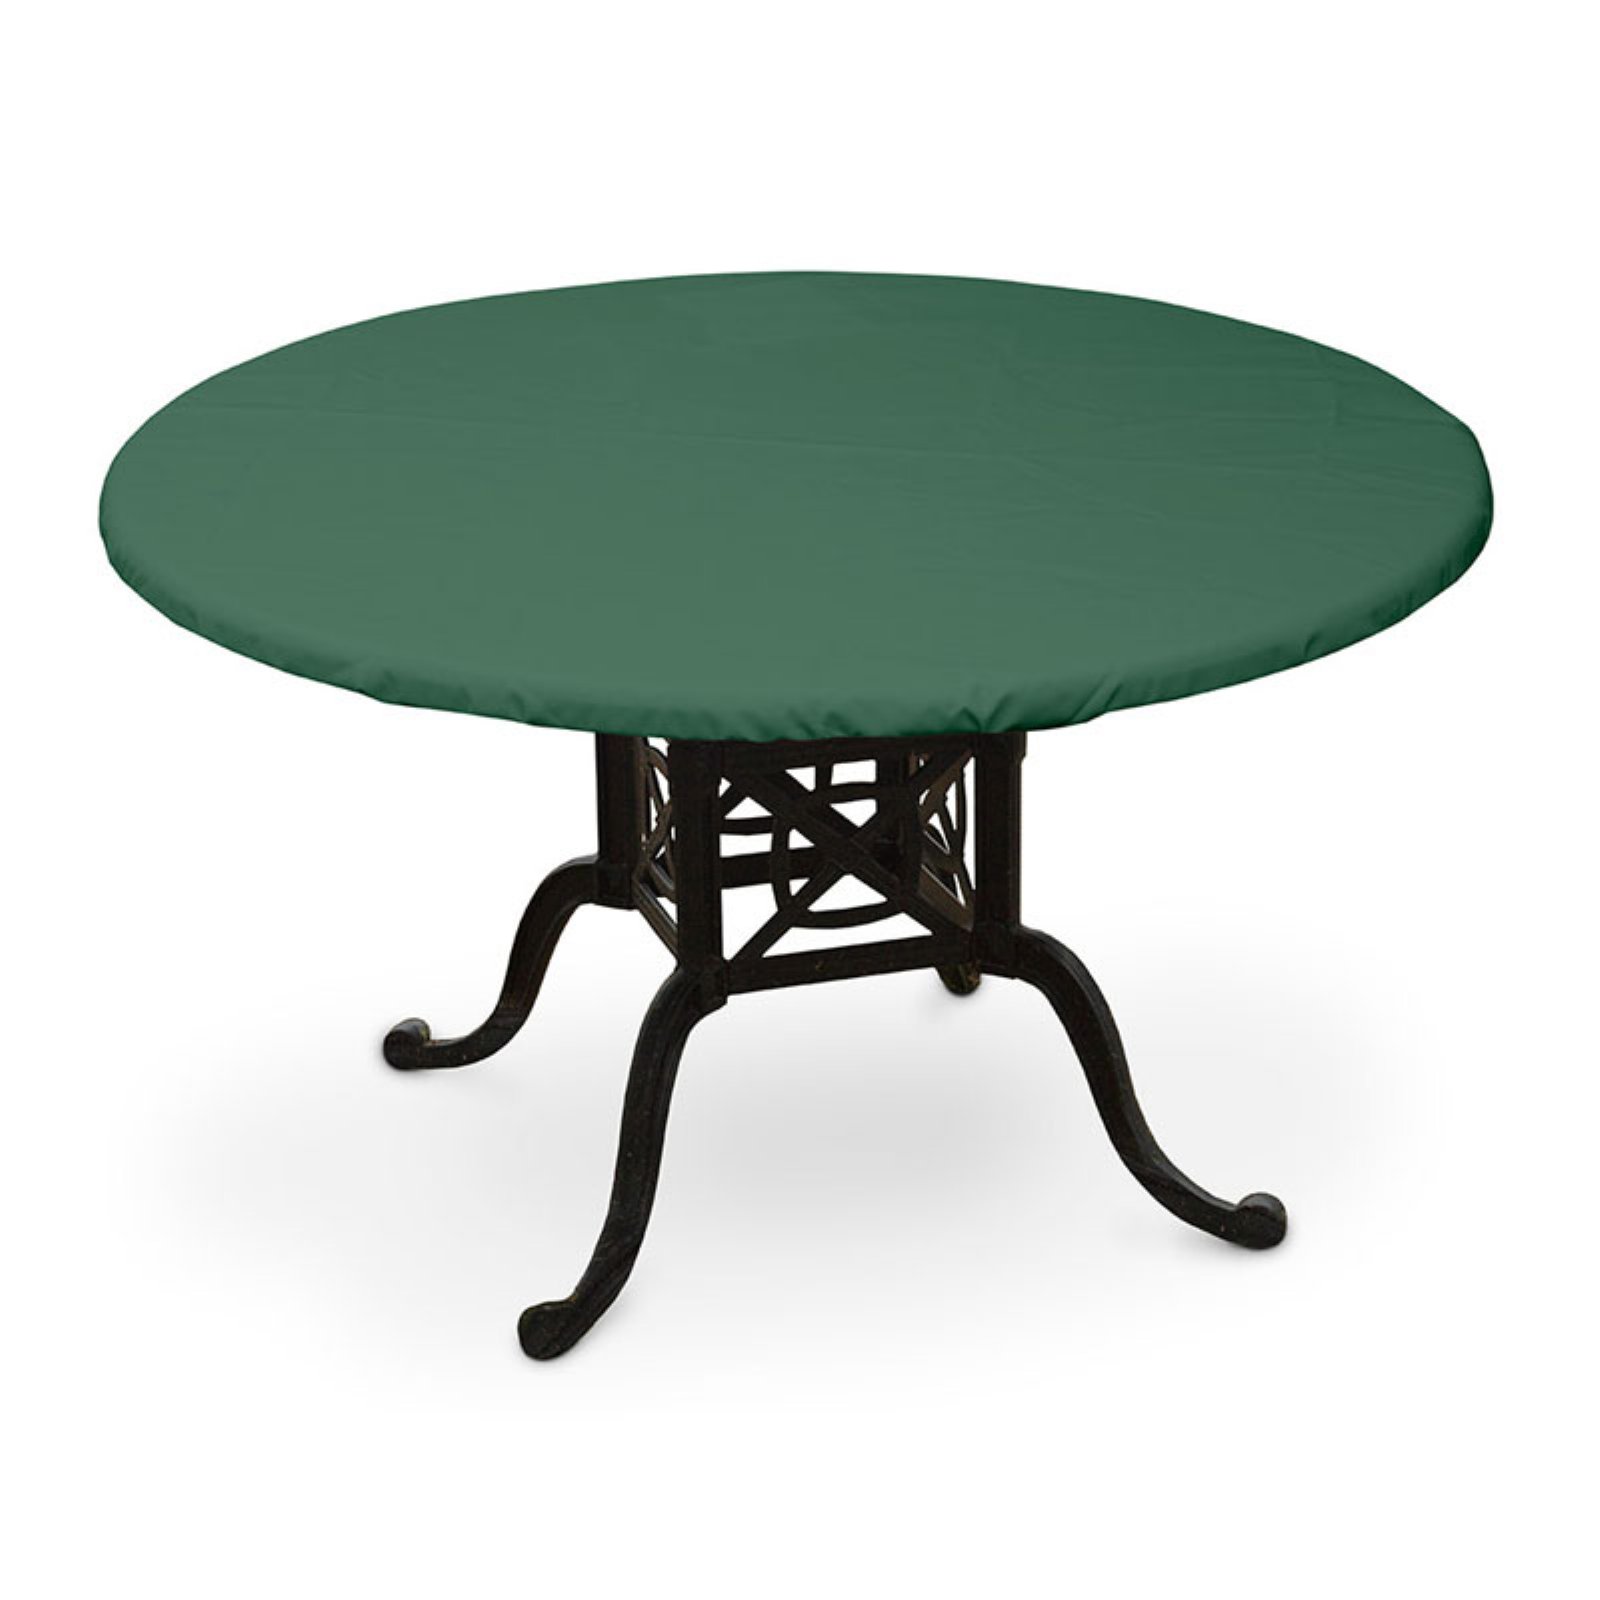 KoverRoos Weathermax Round Dining Table Top Cover - image 2 of 2